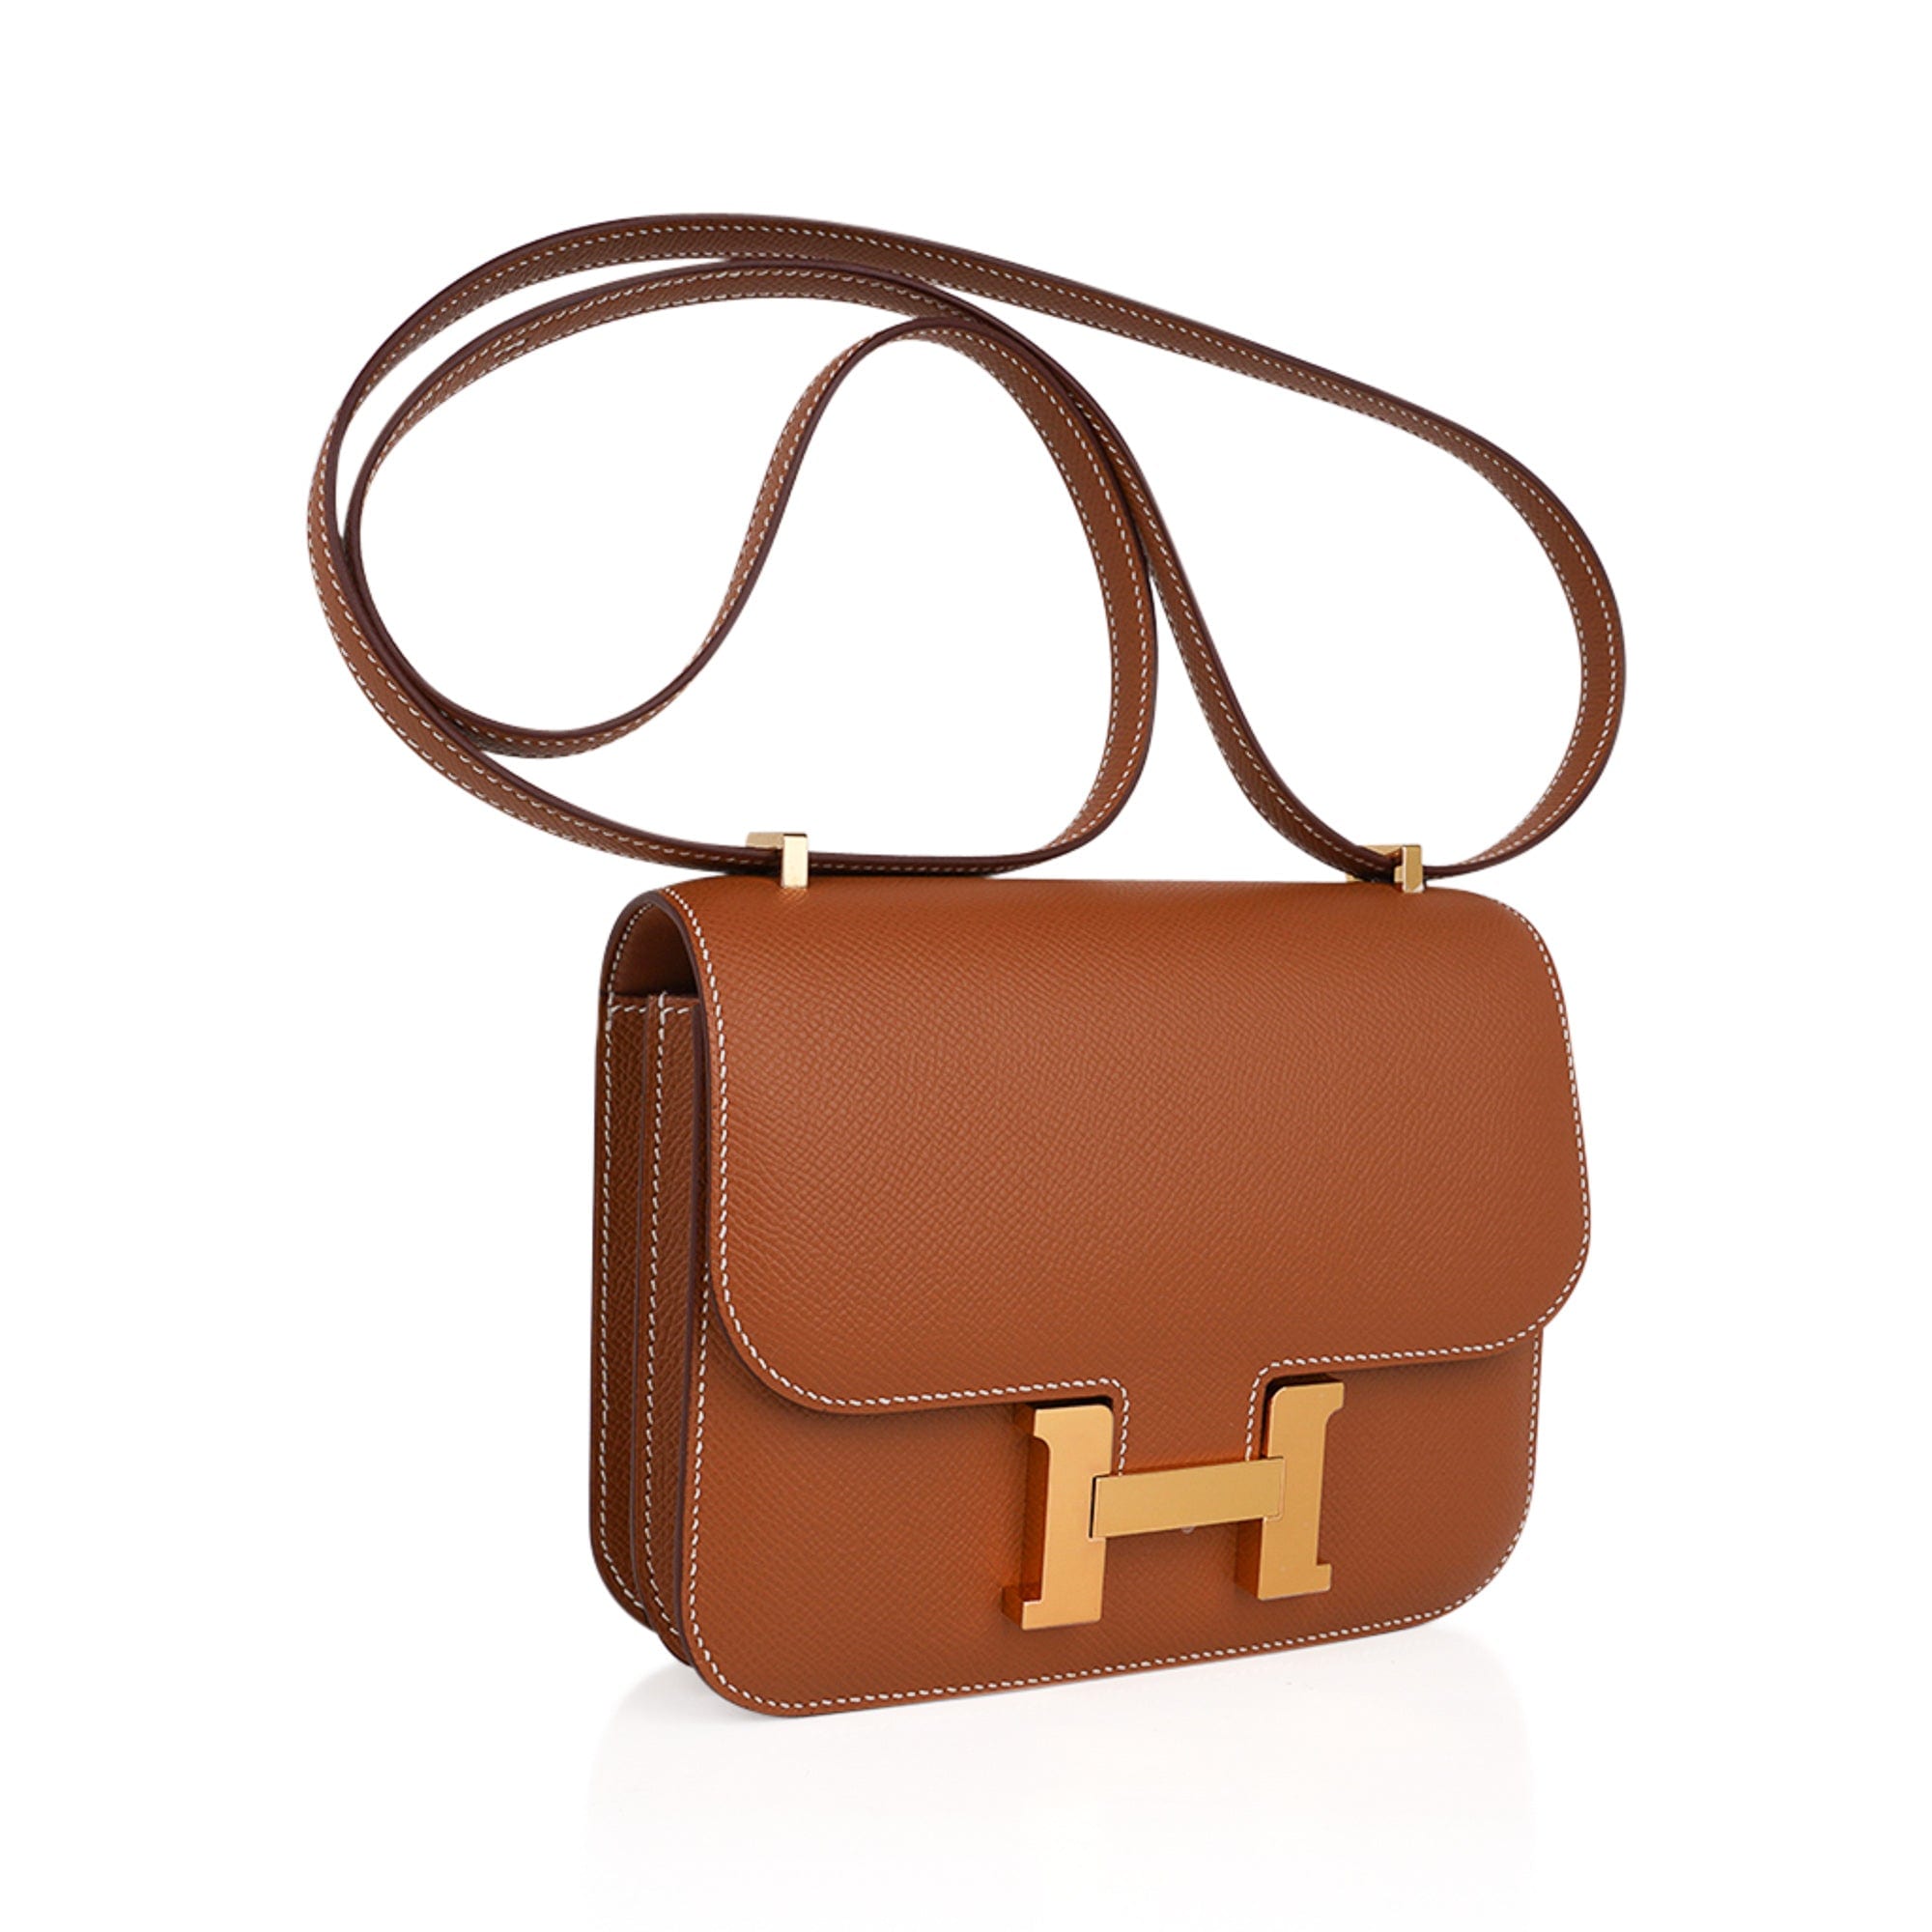 White Hermes Constance Bag with Gold Hardware  Hermes constance bag, Work  fashion, Hermes bags